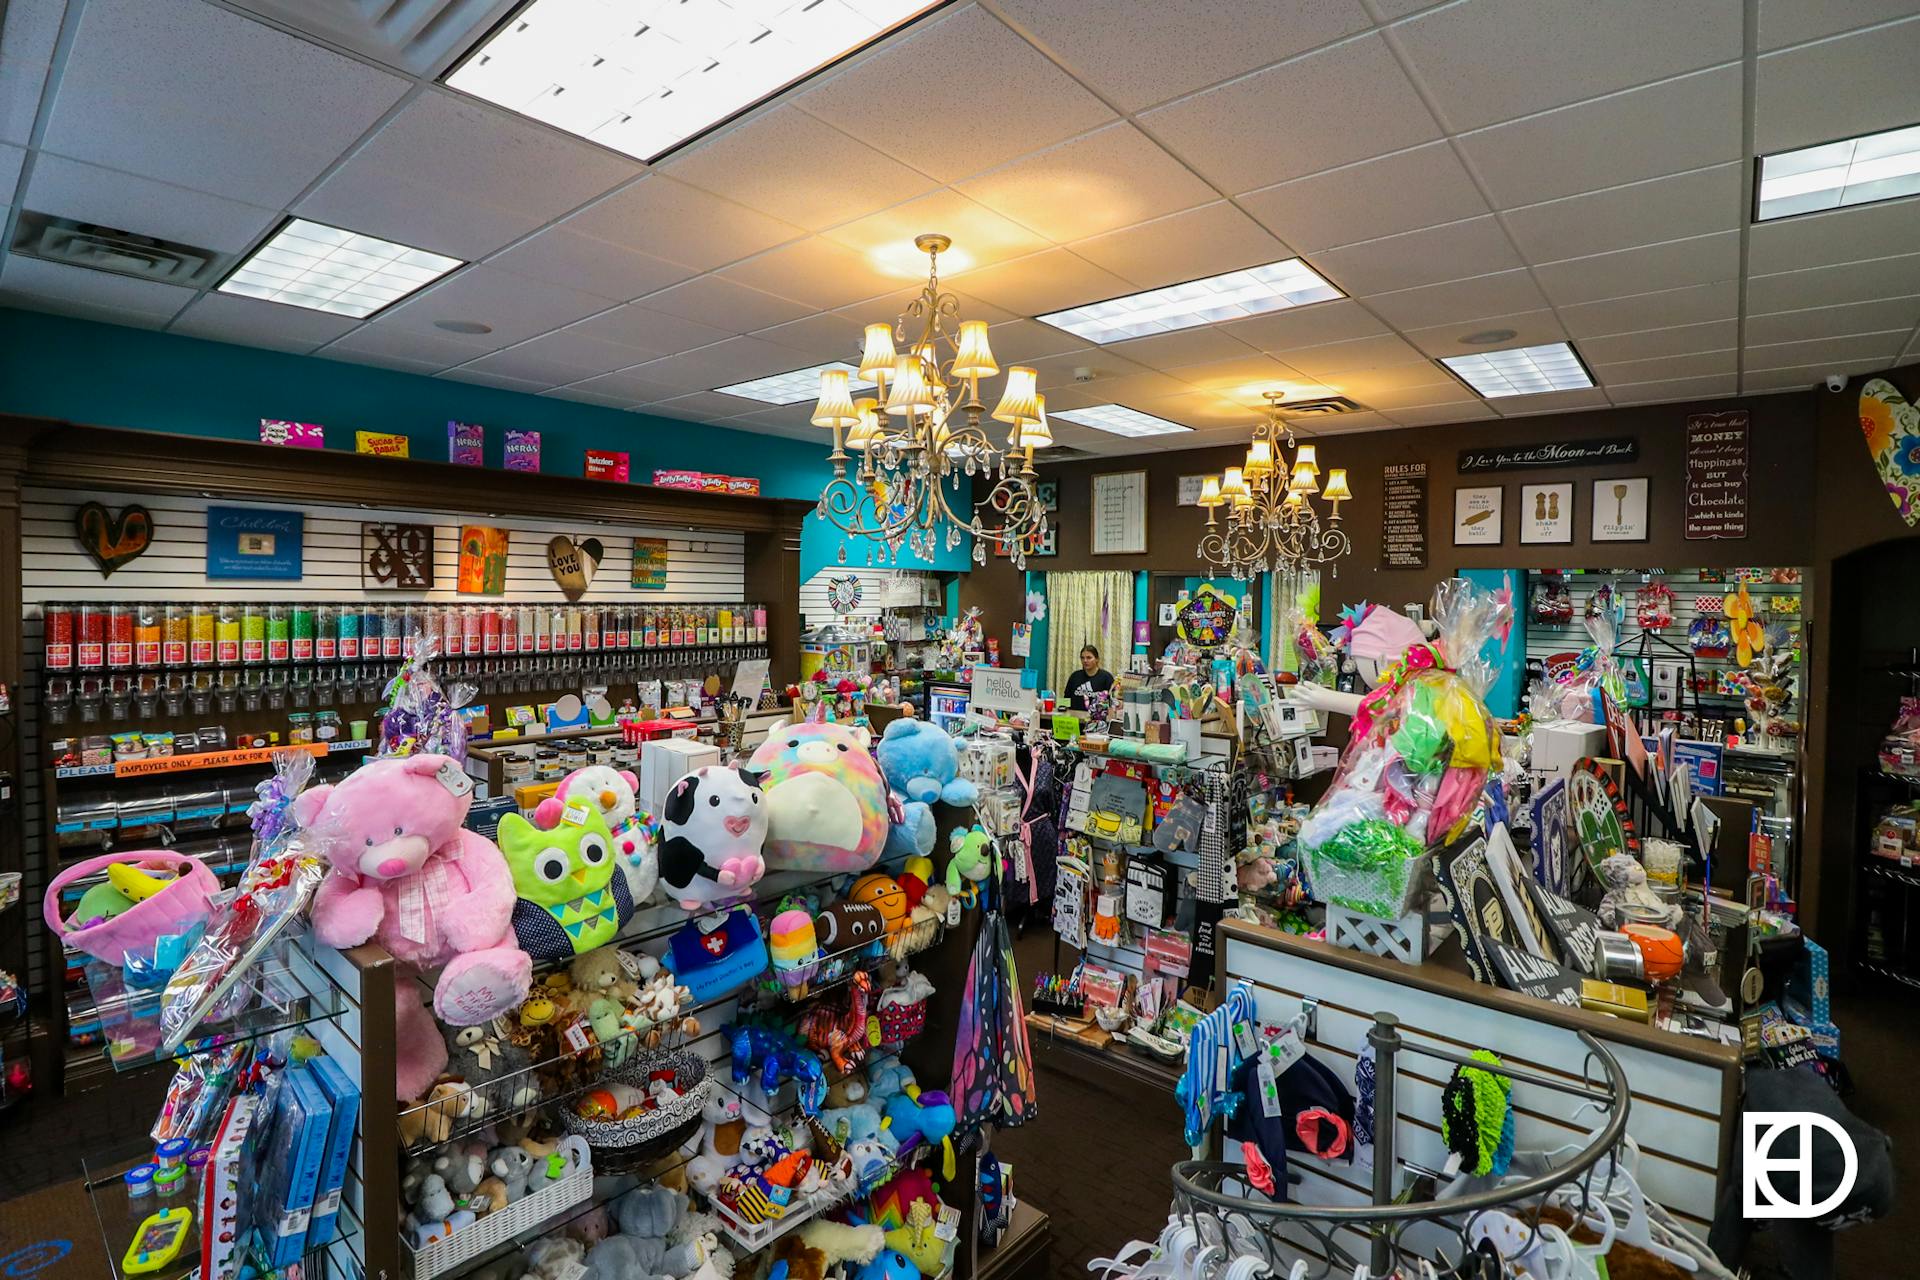 Interior photo of Basket Pizzazz showing colorful candies and toys.